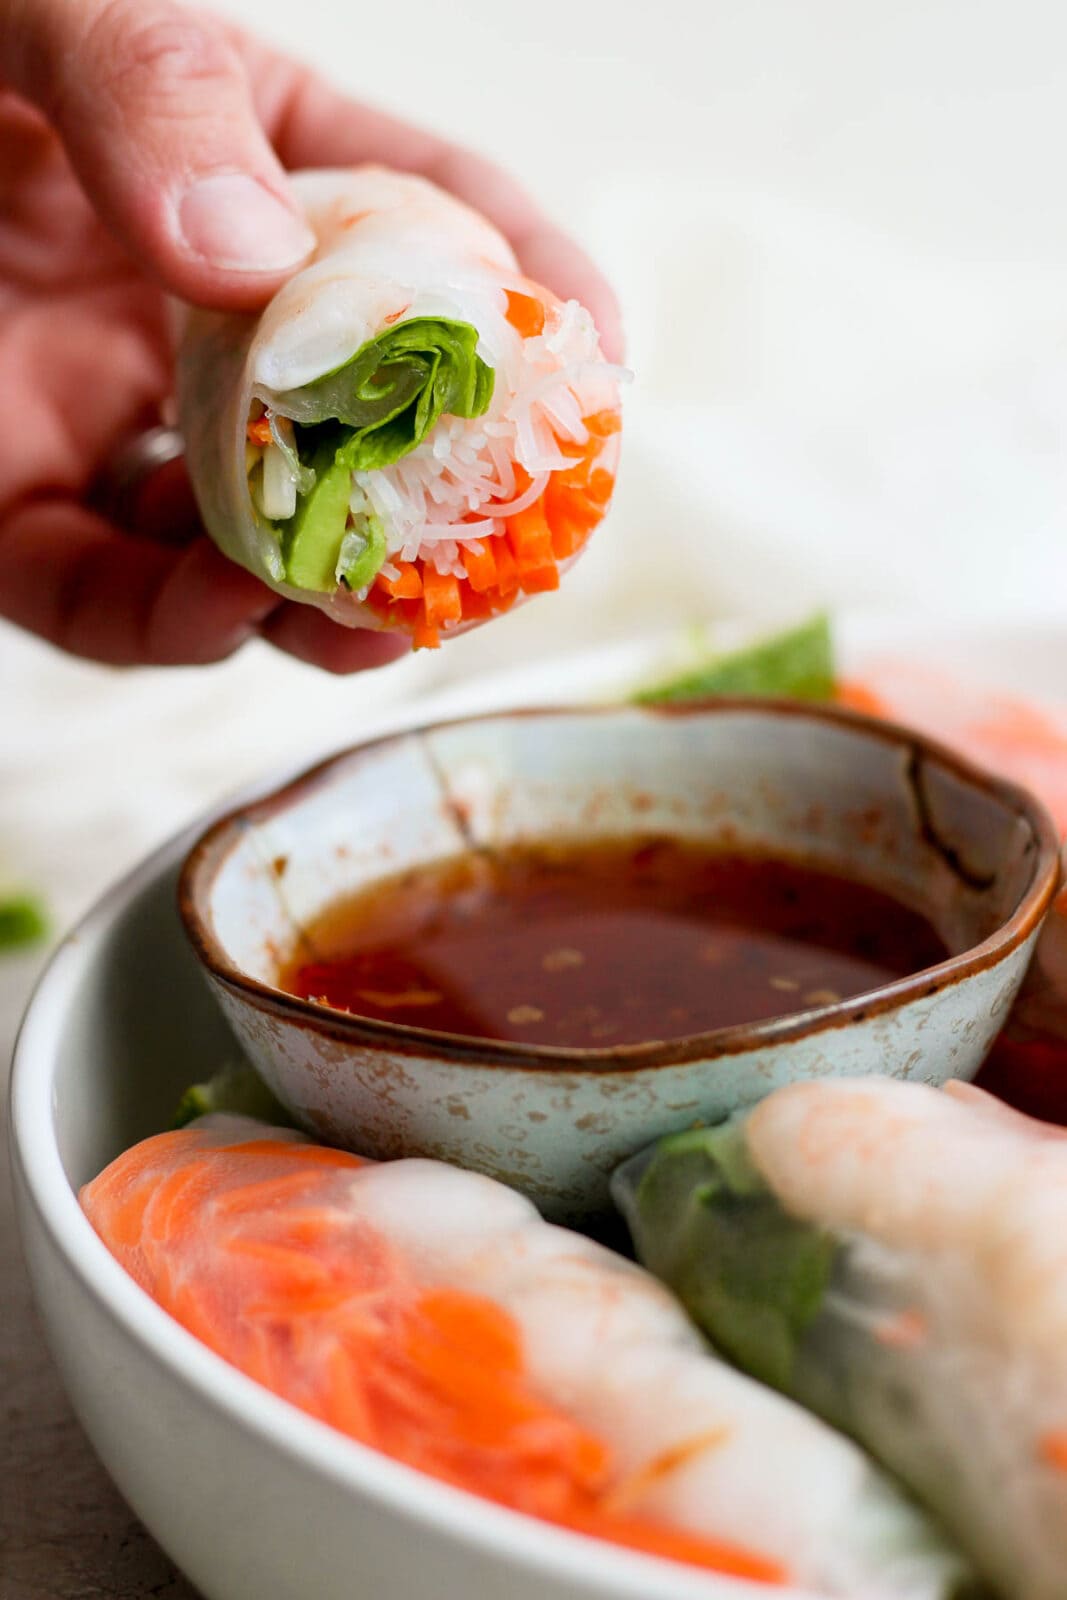 A spring roll being dipped into the dipping sauce.